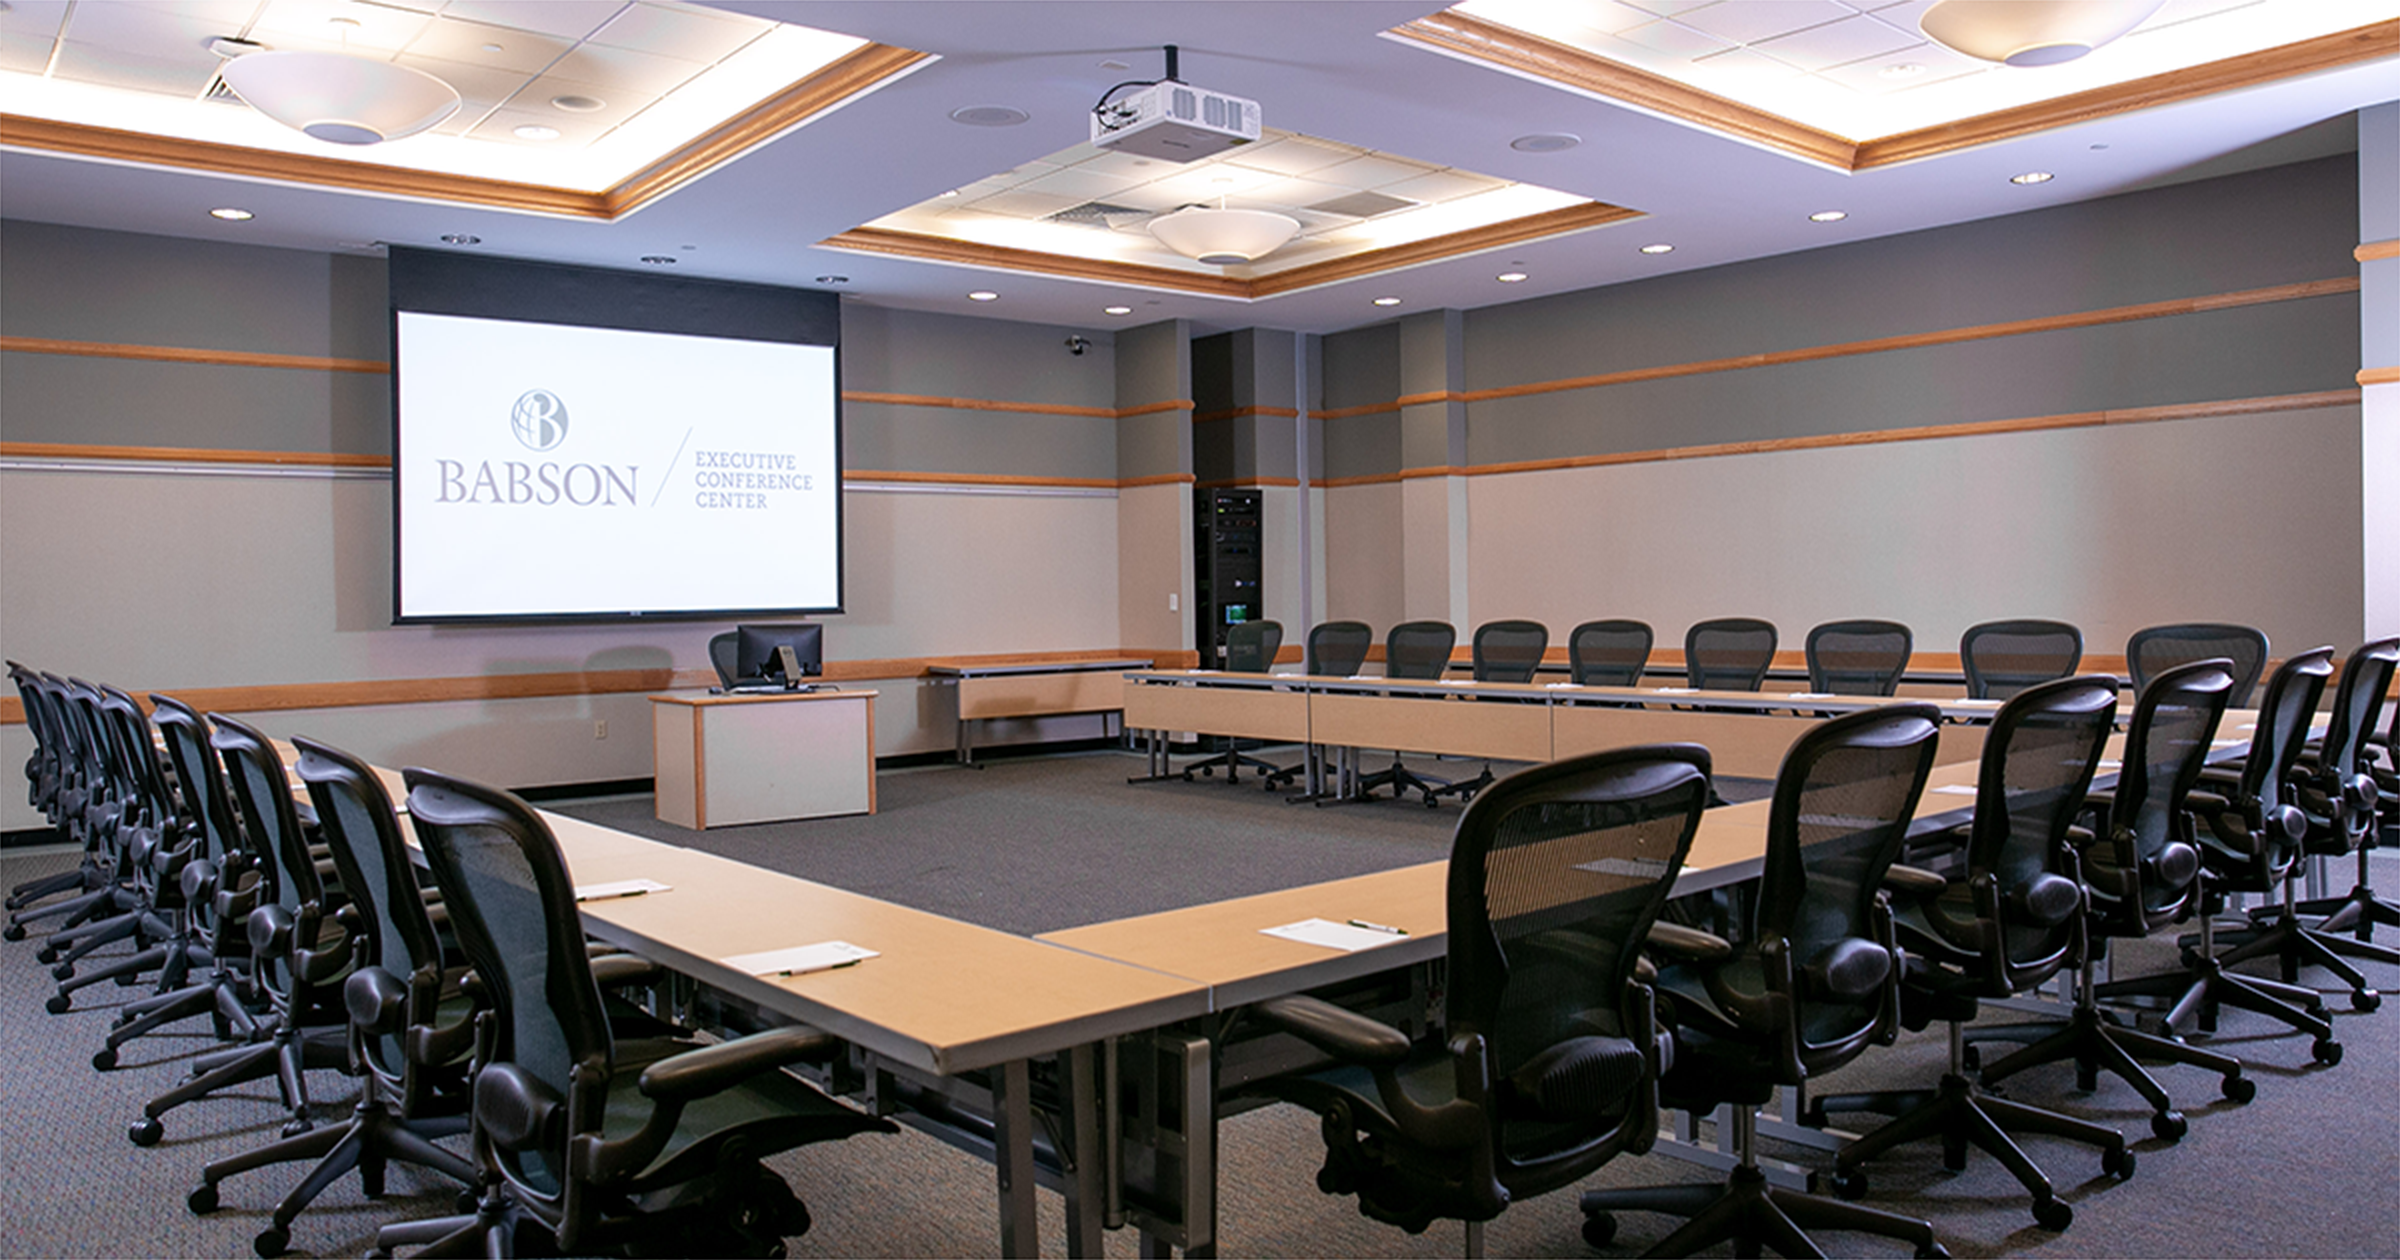 conference room setup in U shape with projector